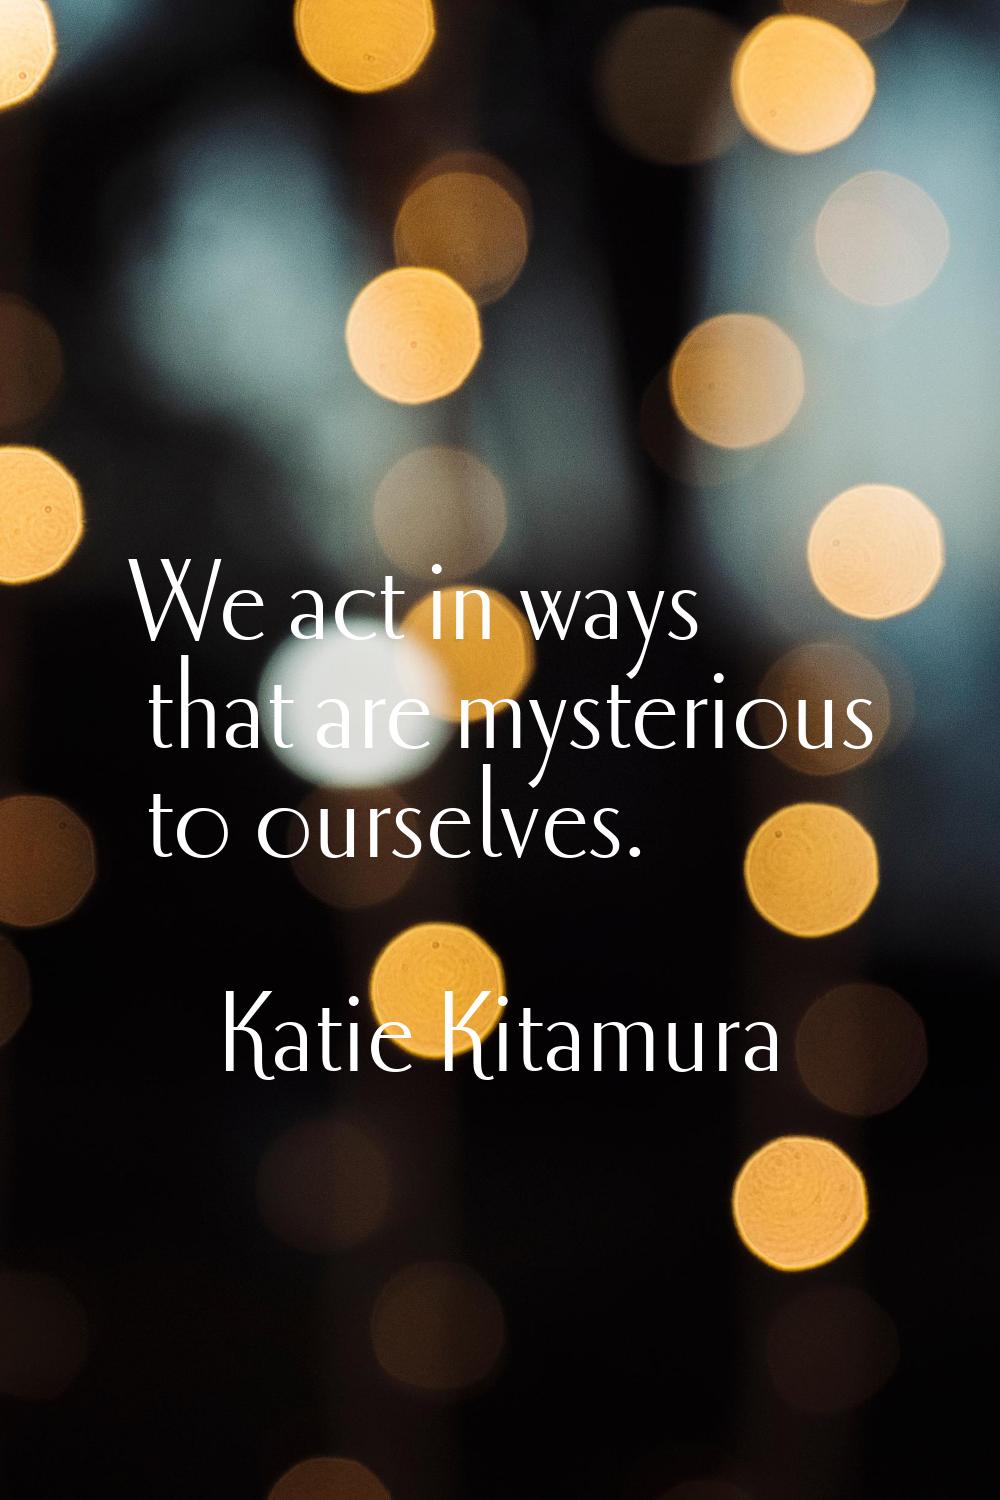 We act in ways that are mysterious to ourselves.